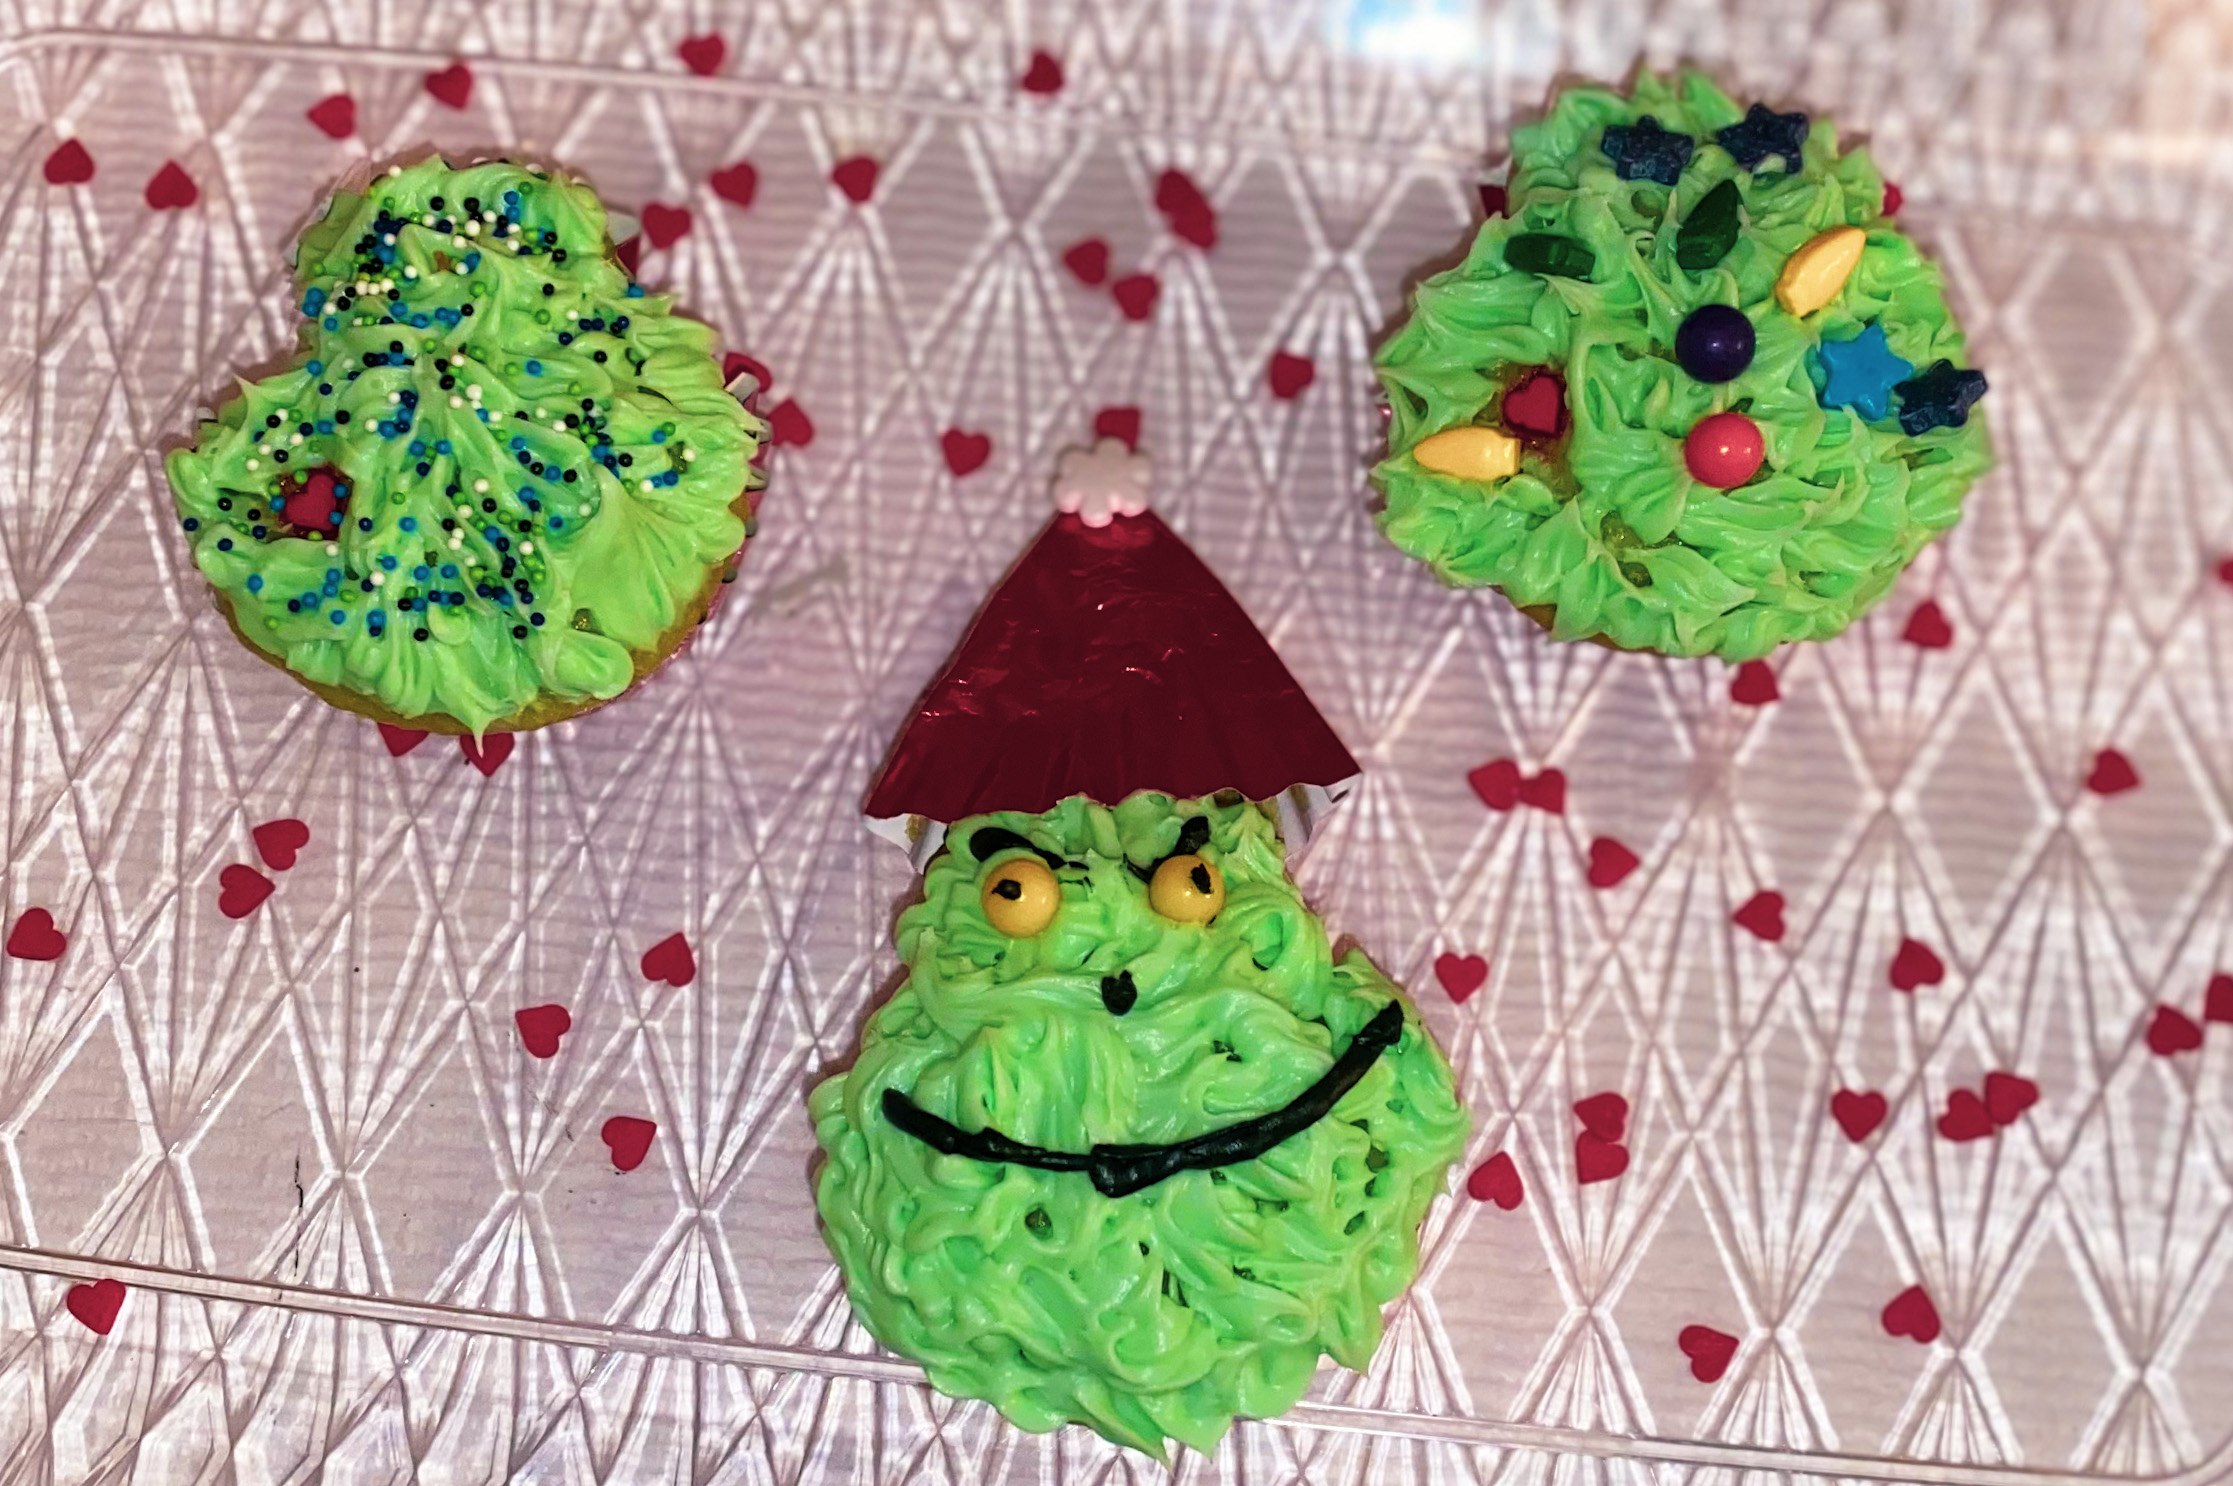 Grinch Inspired cupcakes for holiday movie night